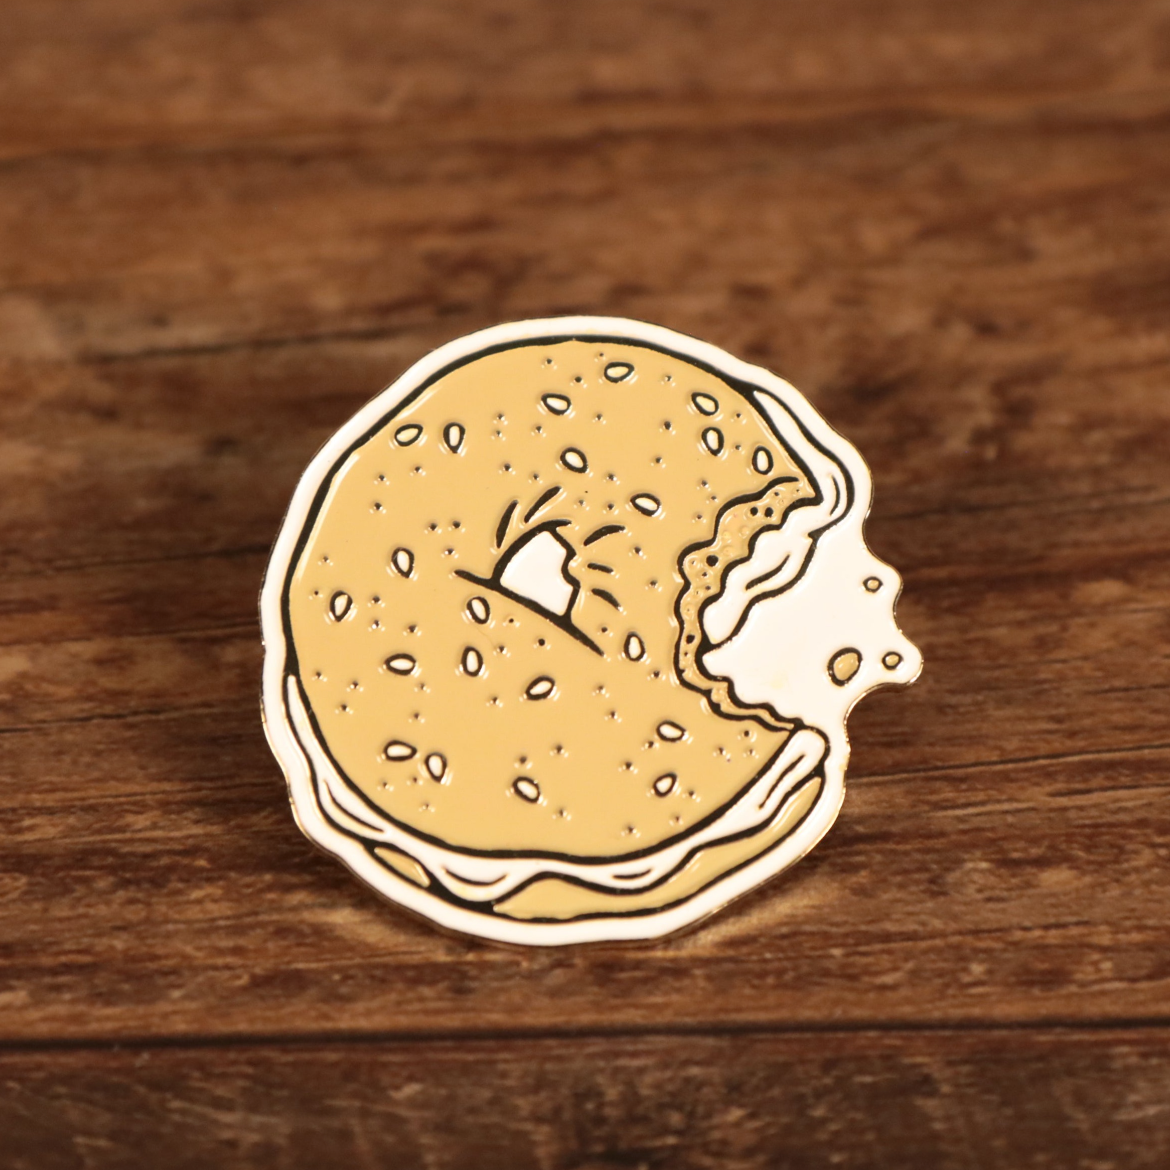 The New York Bagel Fitted Cap Pin | Enamel Pin For Hat